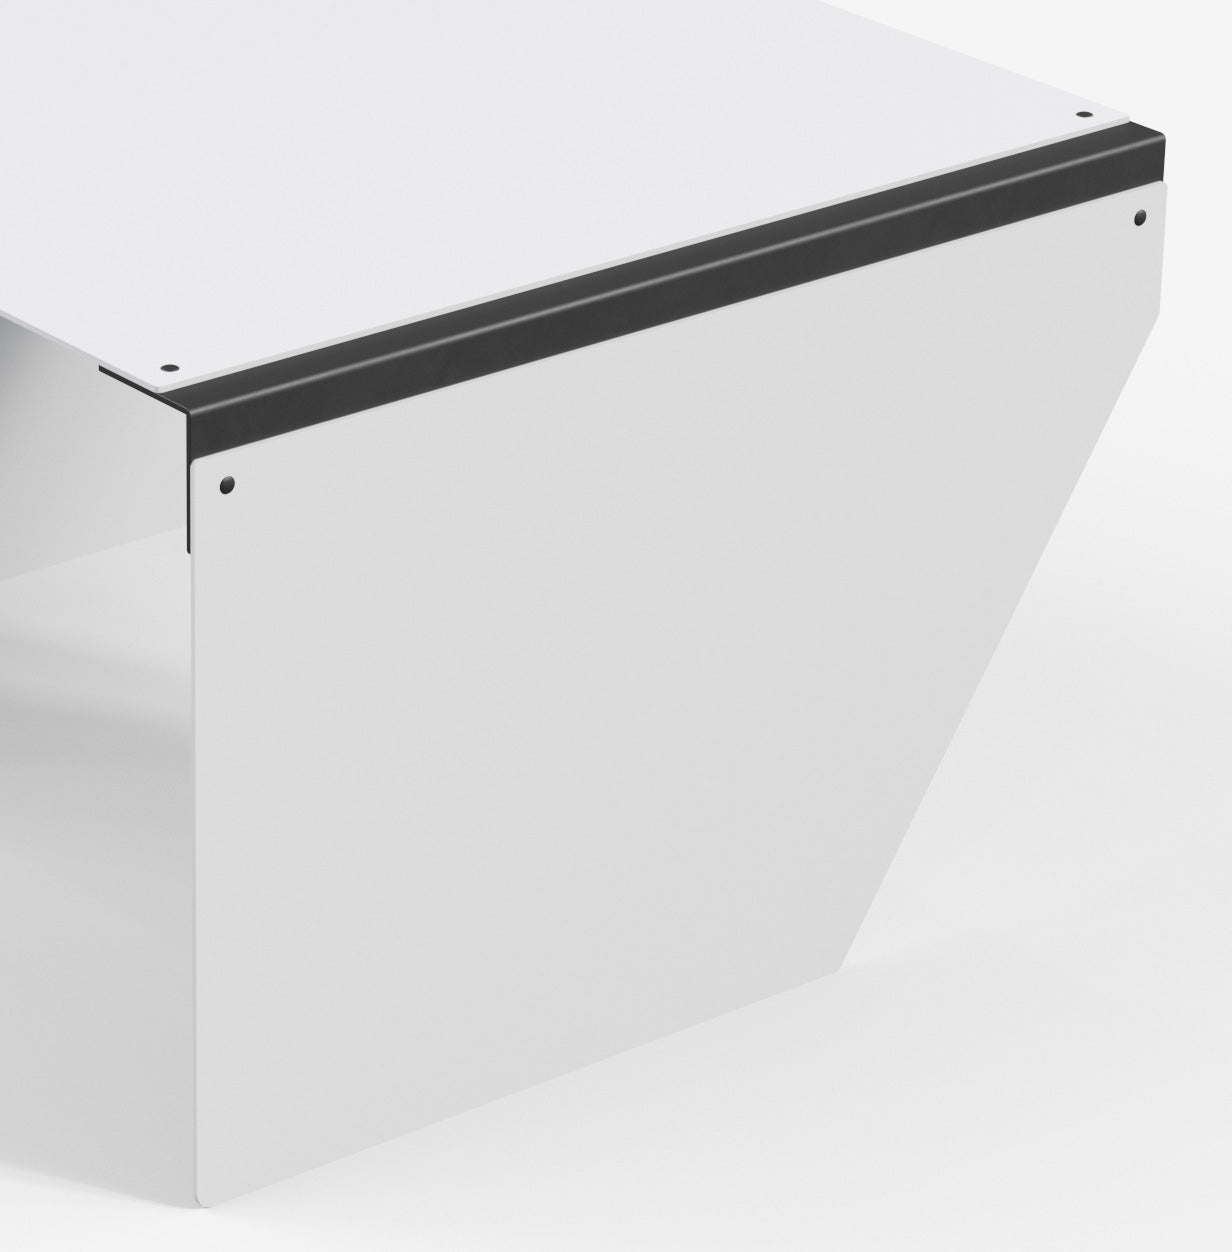 Connect - Coffee Table / XL (Angle, White)